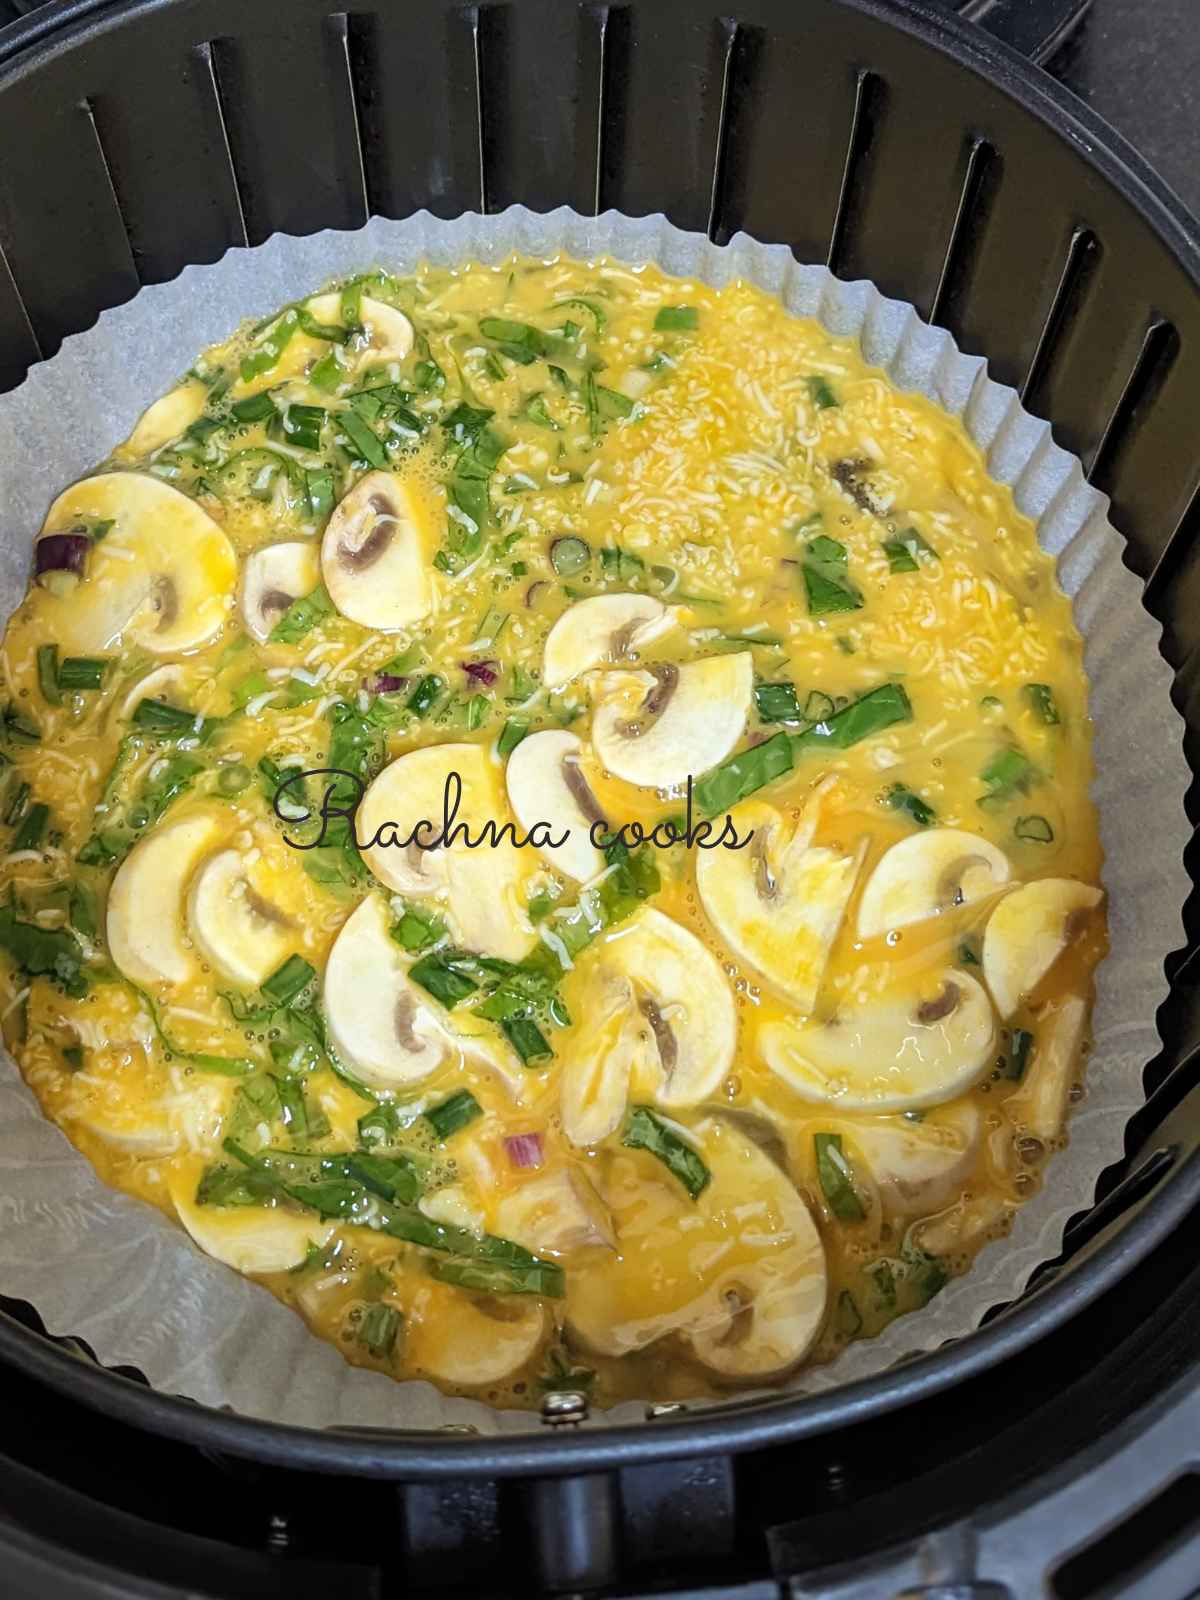 Frittata mix poured into a parchment paper bowl placed in air fryer basket.